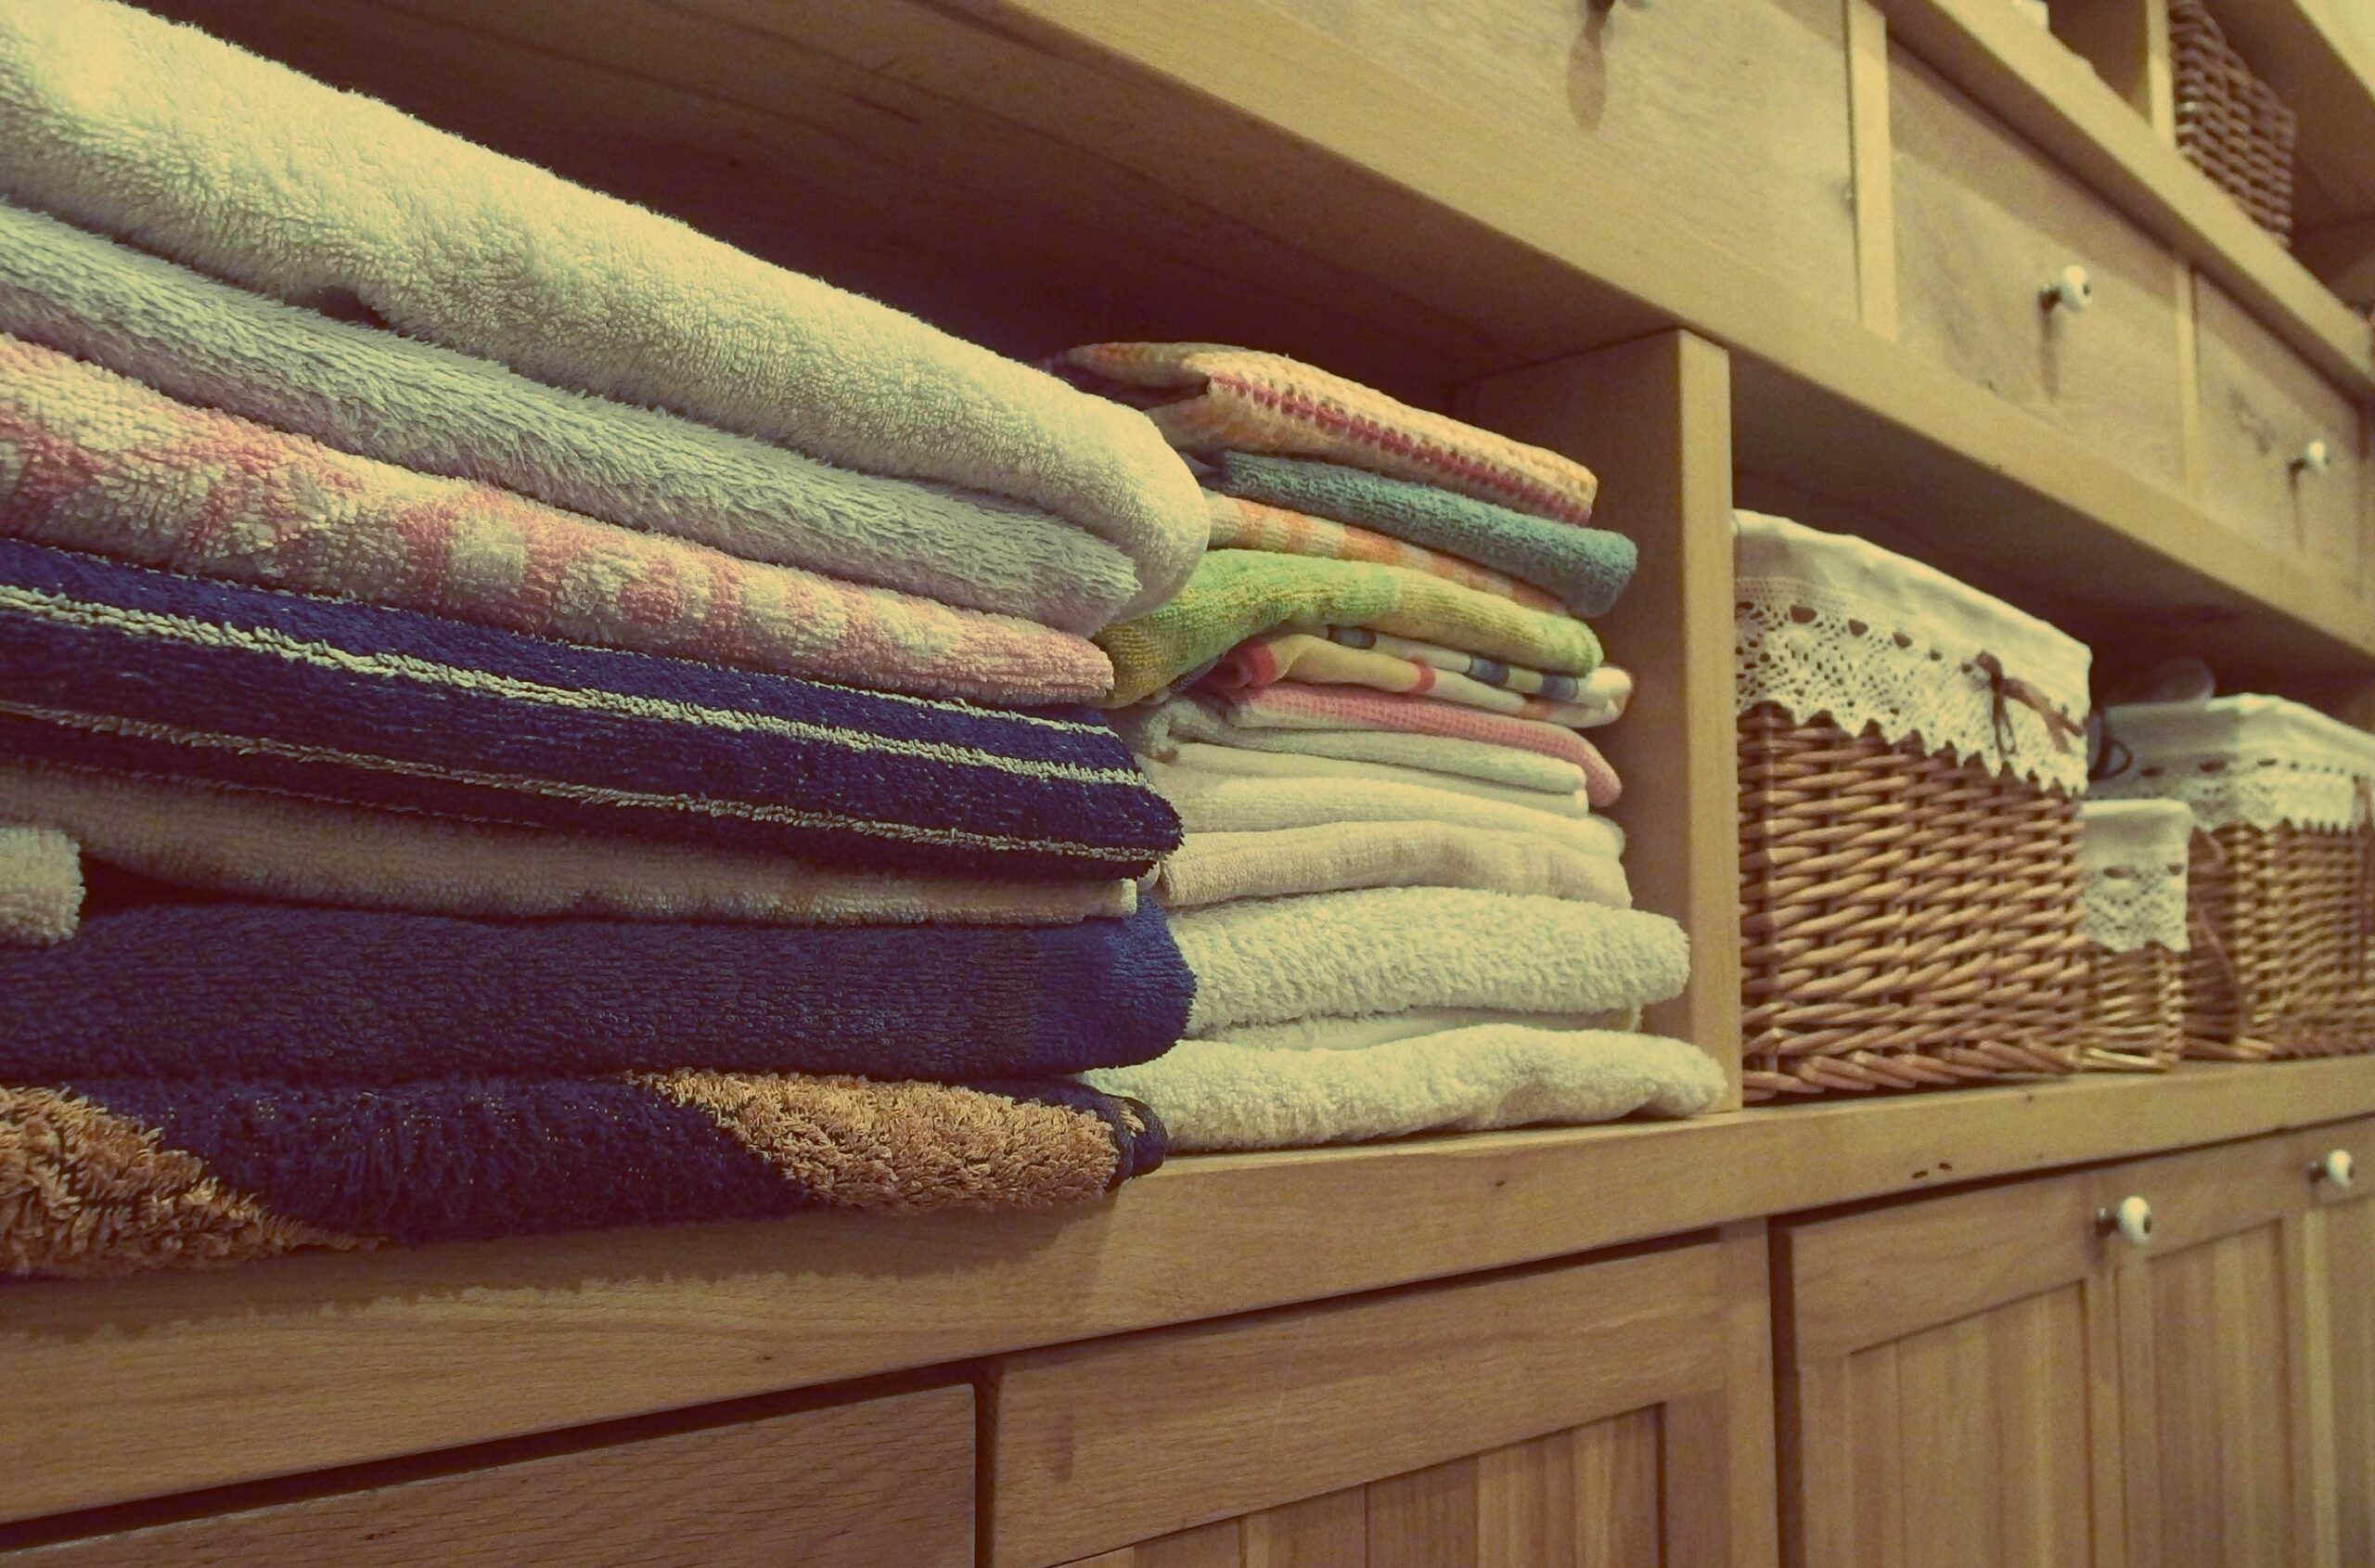 folded towels in a cabinet cleaner laundry